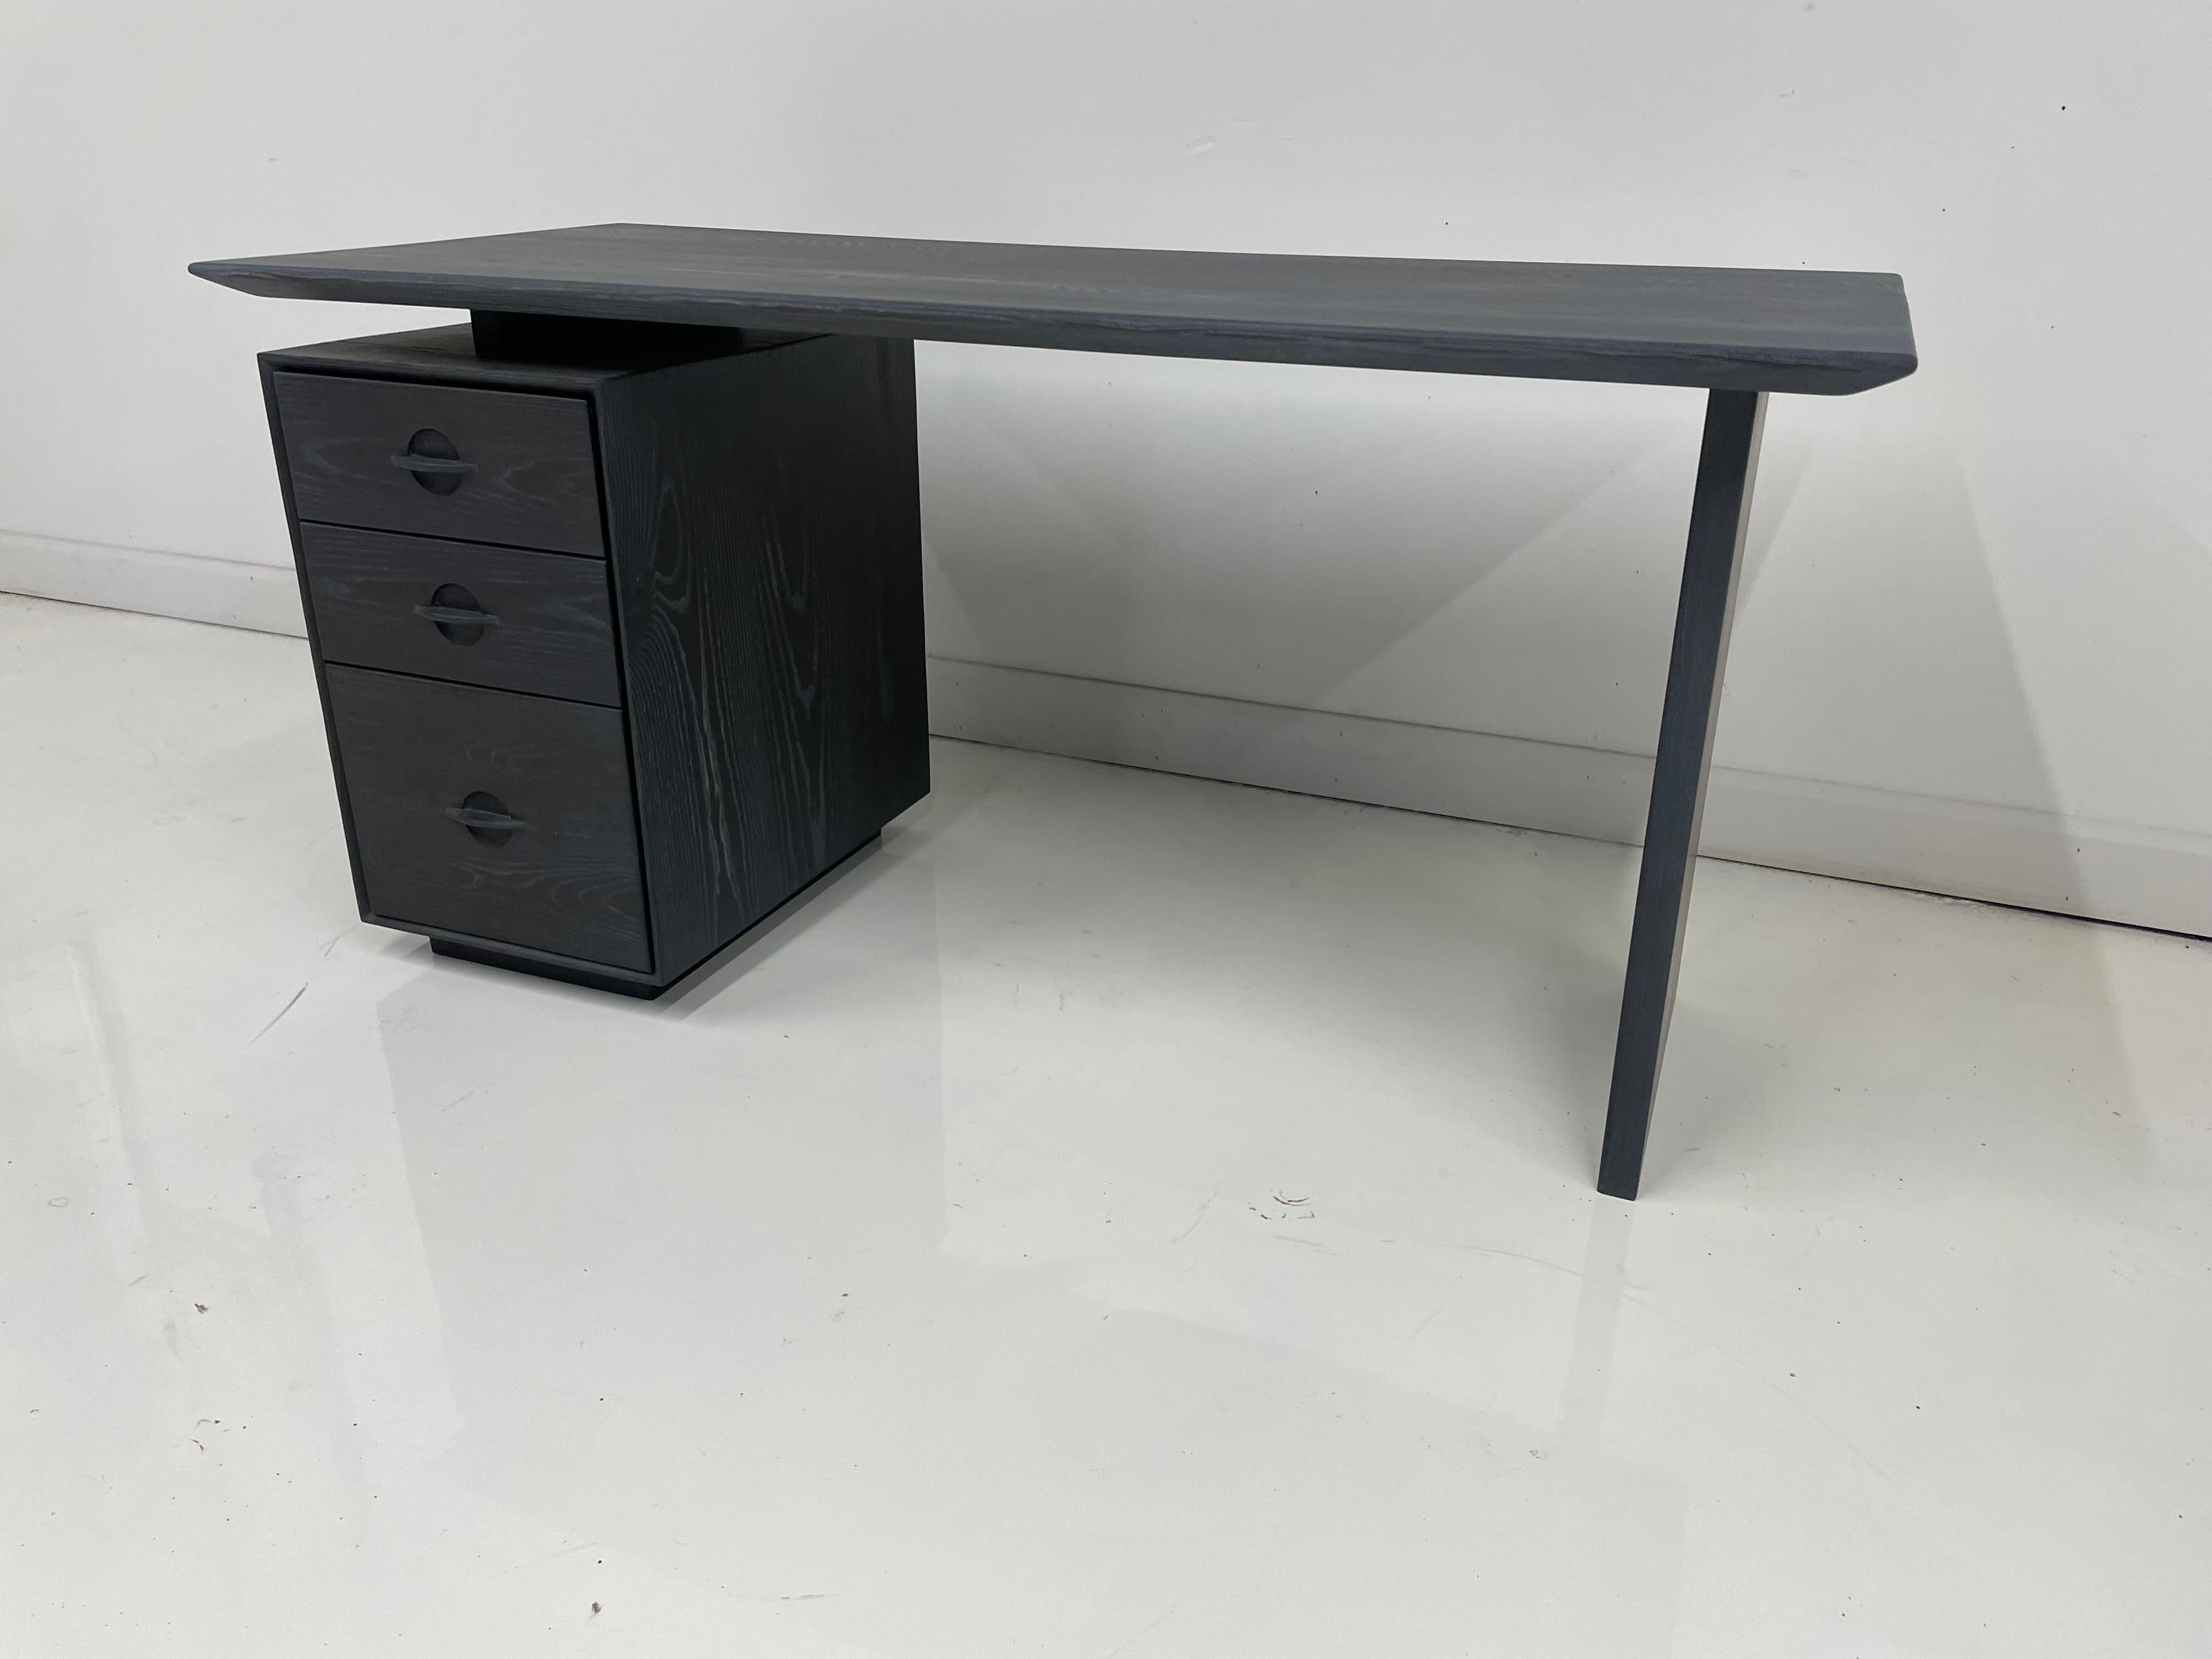 The odin desk has been designed to be as minimal as possible without reducing the functionality generally required by a desk. Many modern desks come without storage - we saw this as a huge drawback (who doesn't need desk storage?!) A simple top with